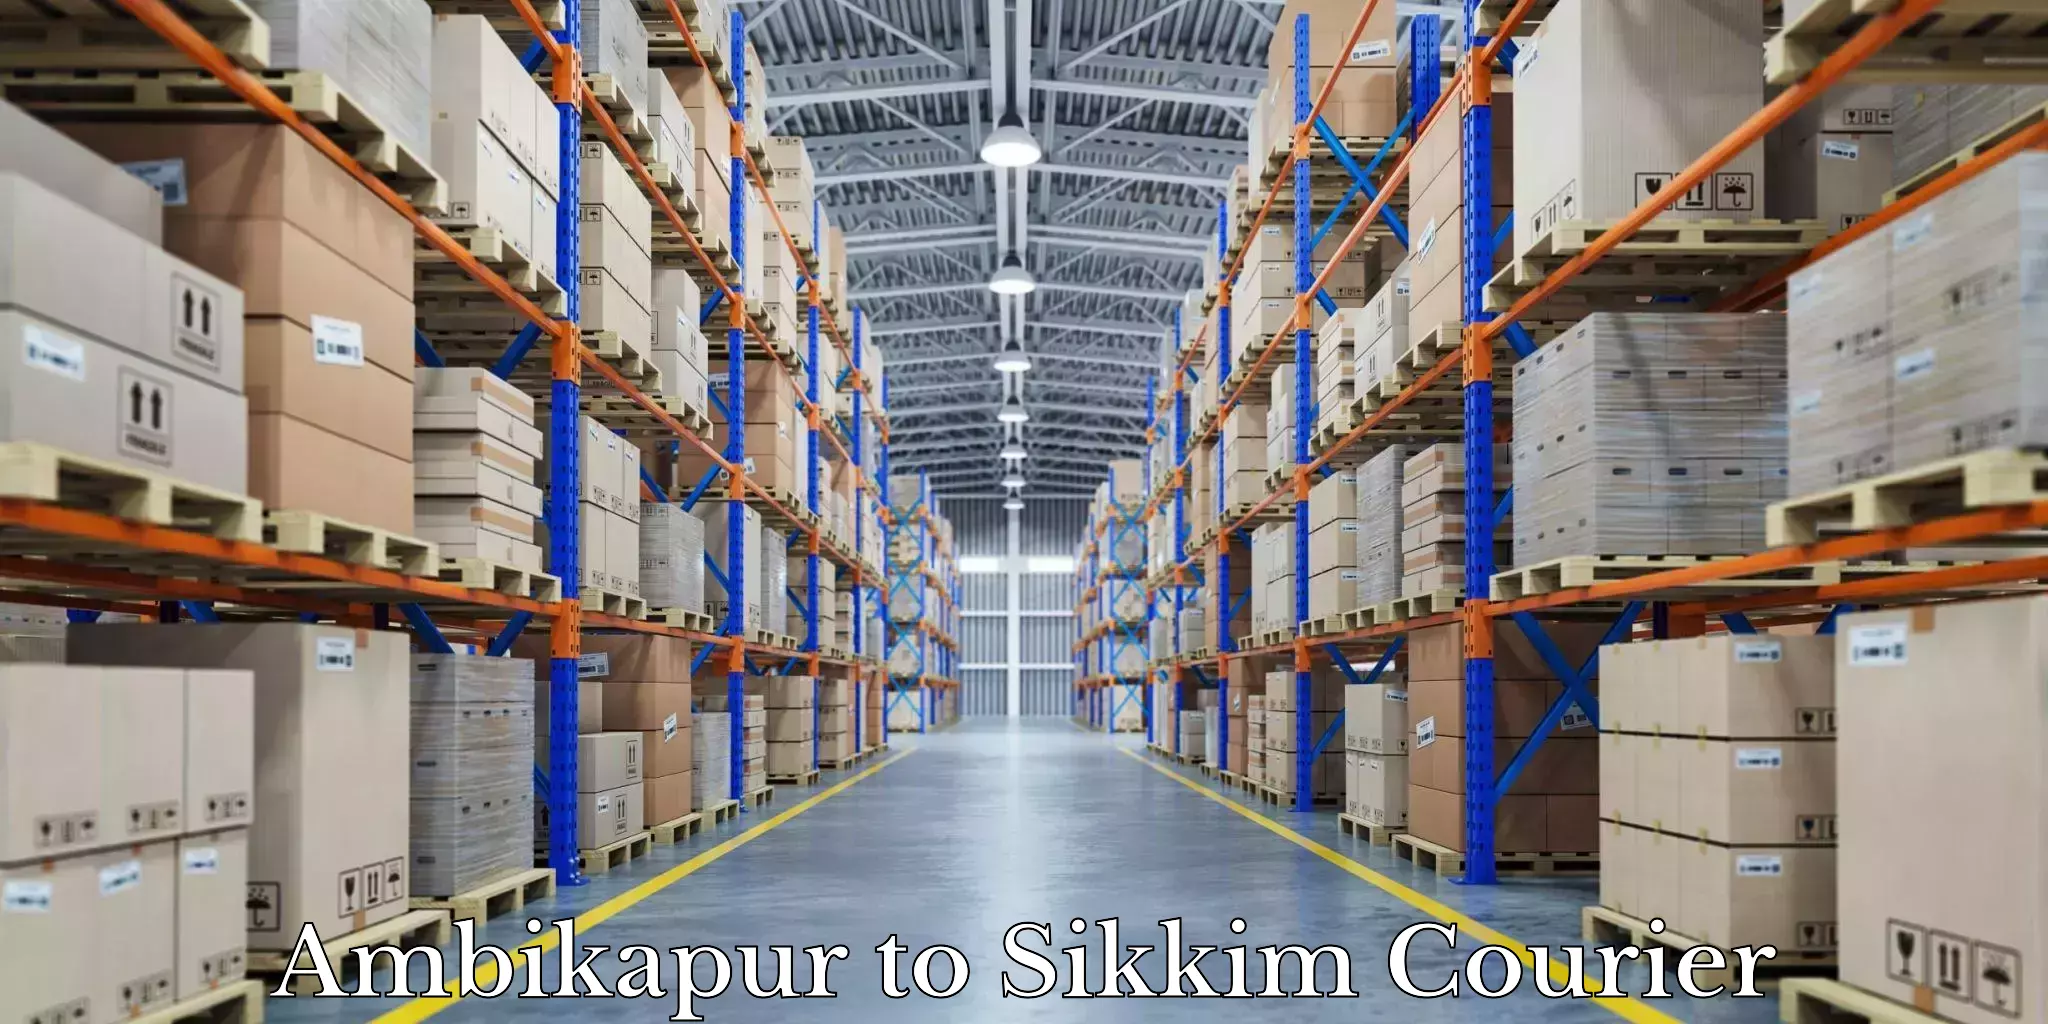 Furniture transport specialists Ambikapur to Sikkim